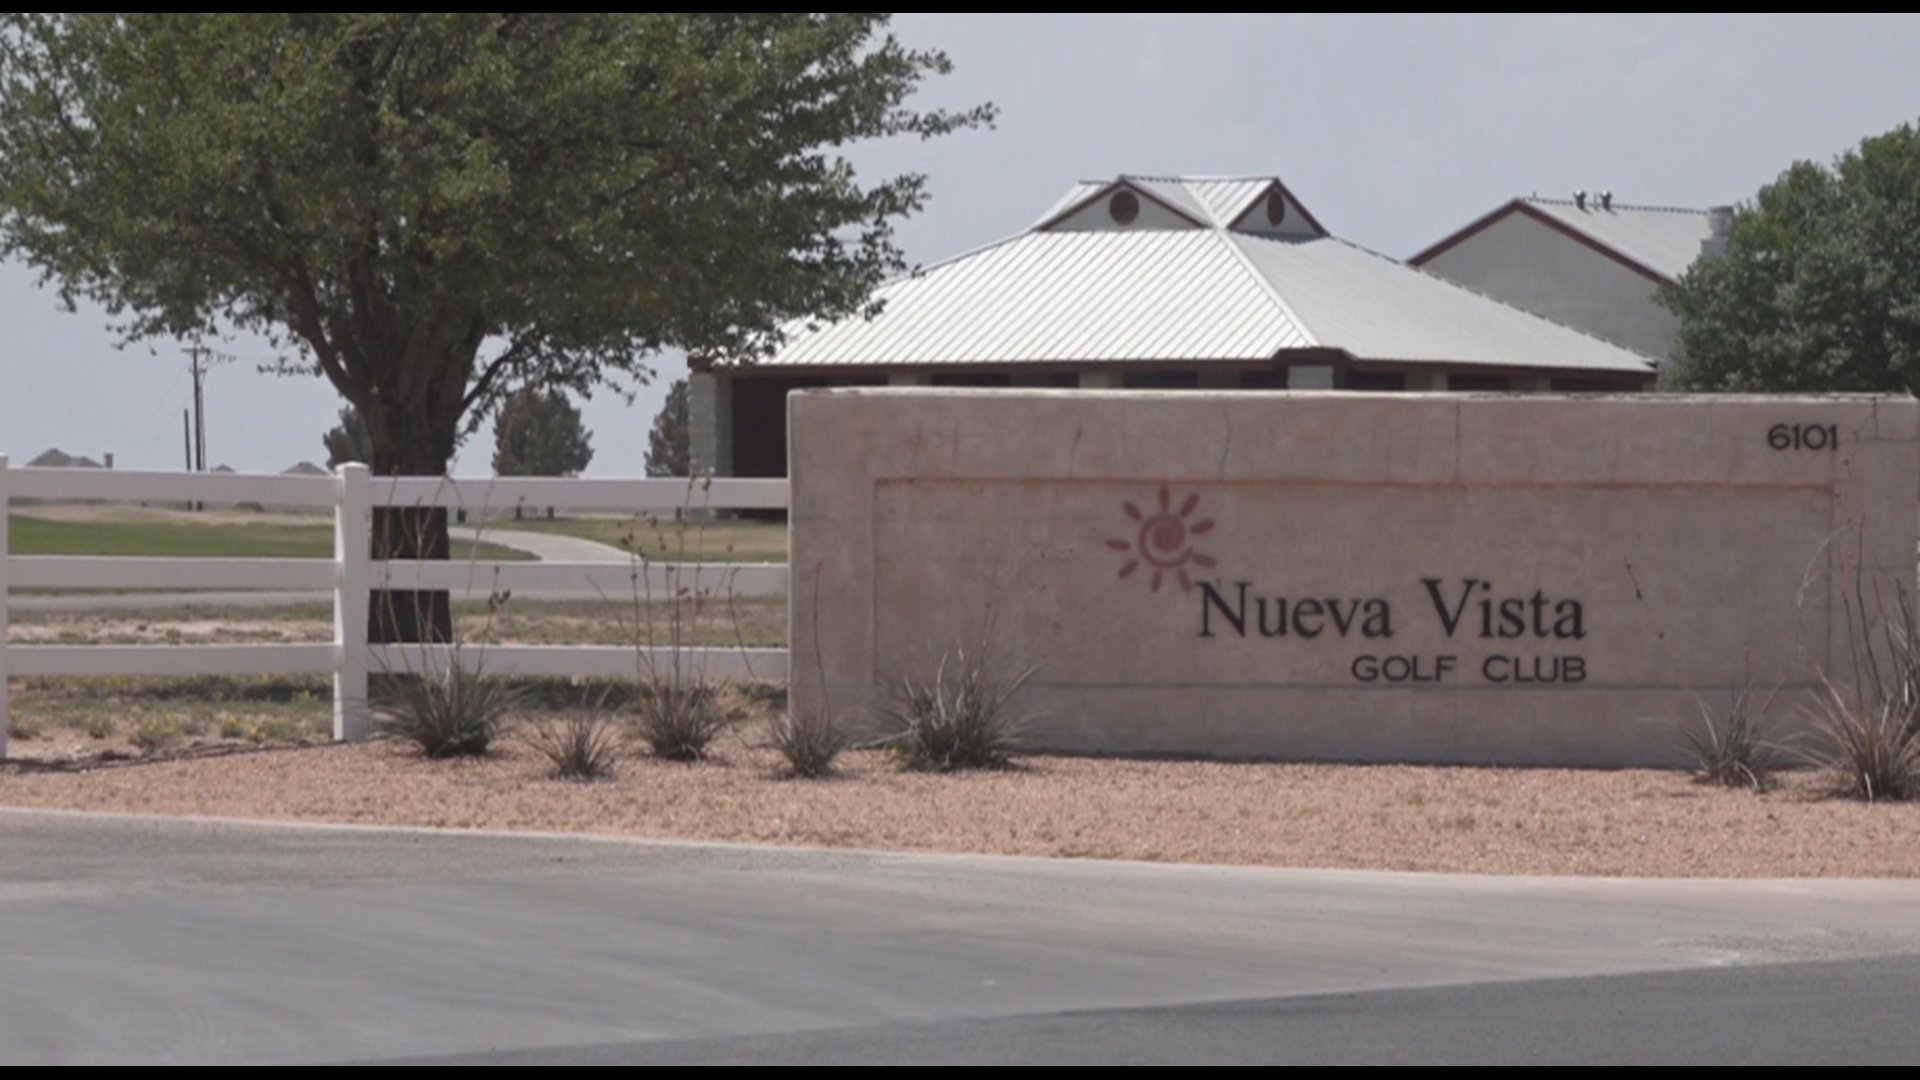 Midland City council is meeting Aug. 16 at 3 p.m. to go over development plans at Nueva Vista Golf Course. The meeting is open to the public.